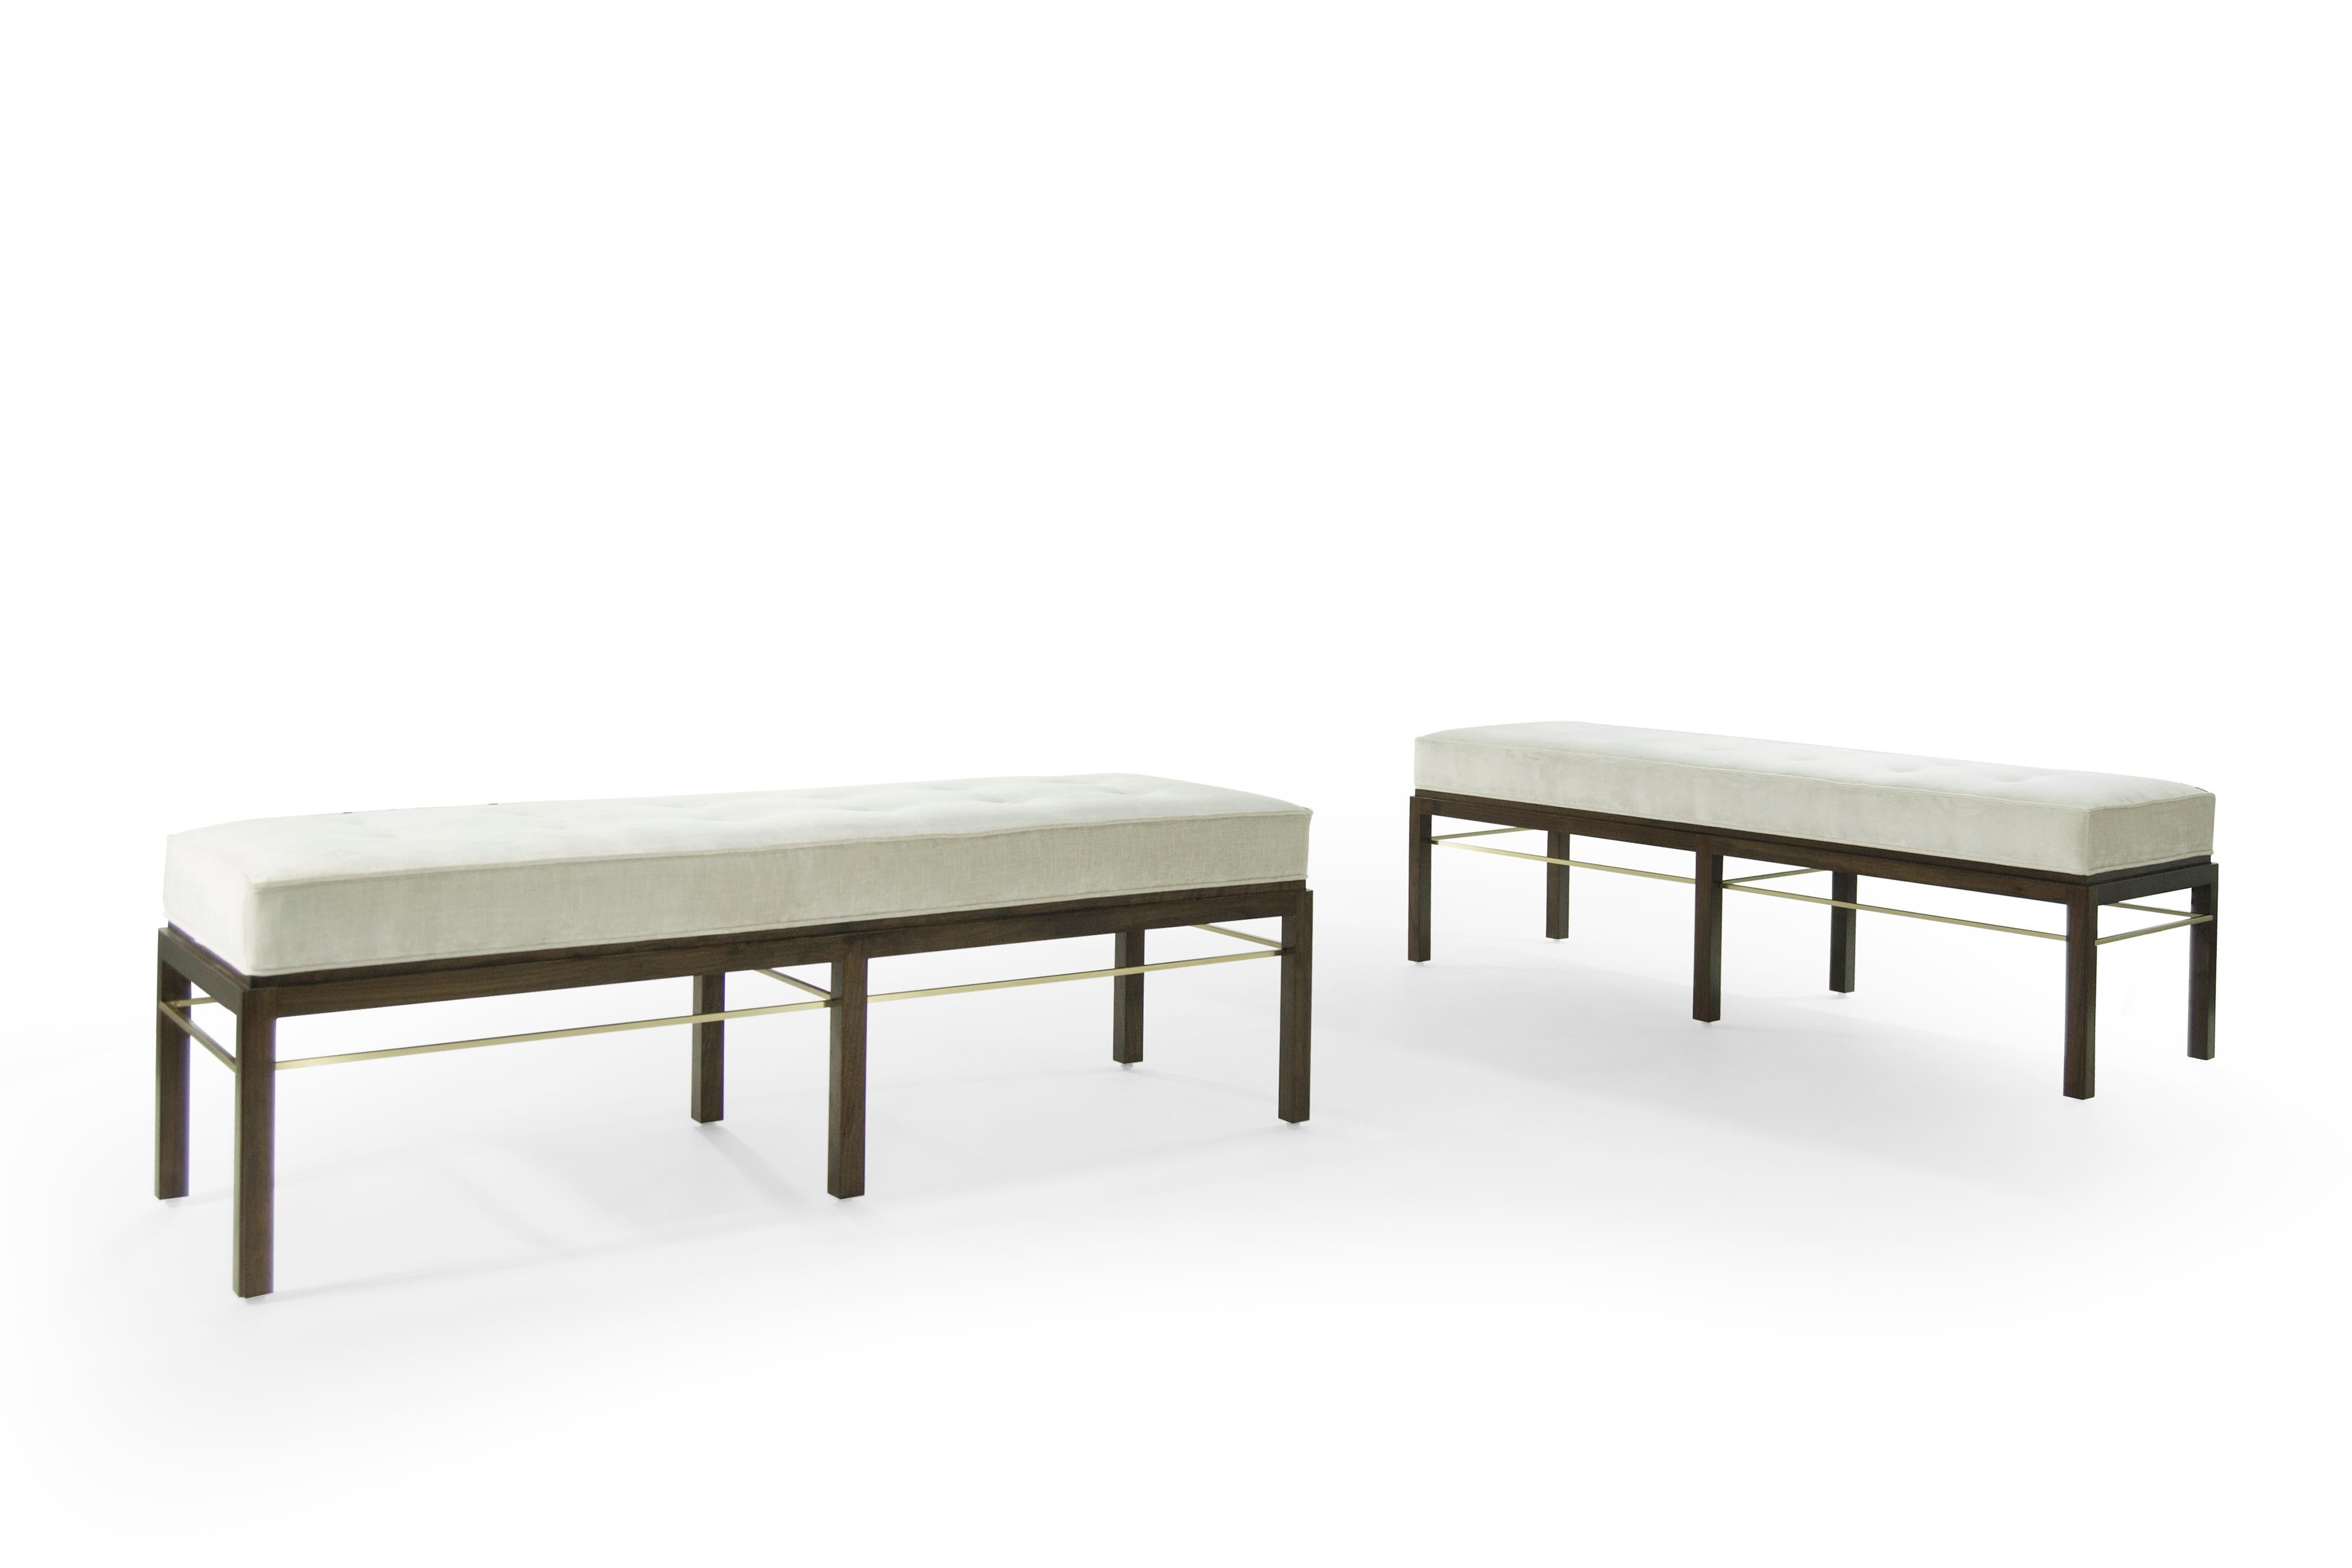 20th Century Set of Edward Wormley for Dunbar Brass Stretcher Benches, 1950s